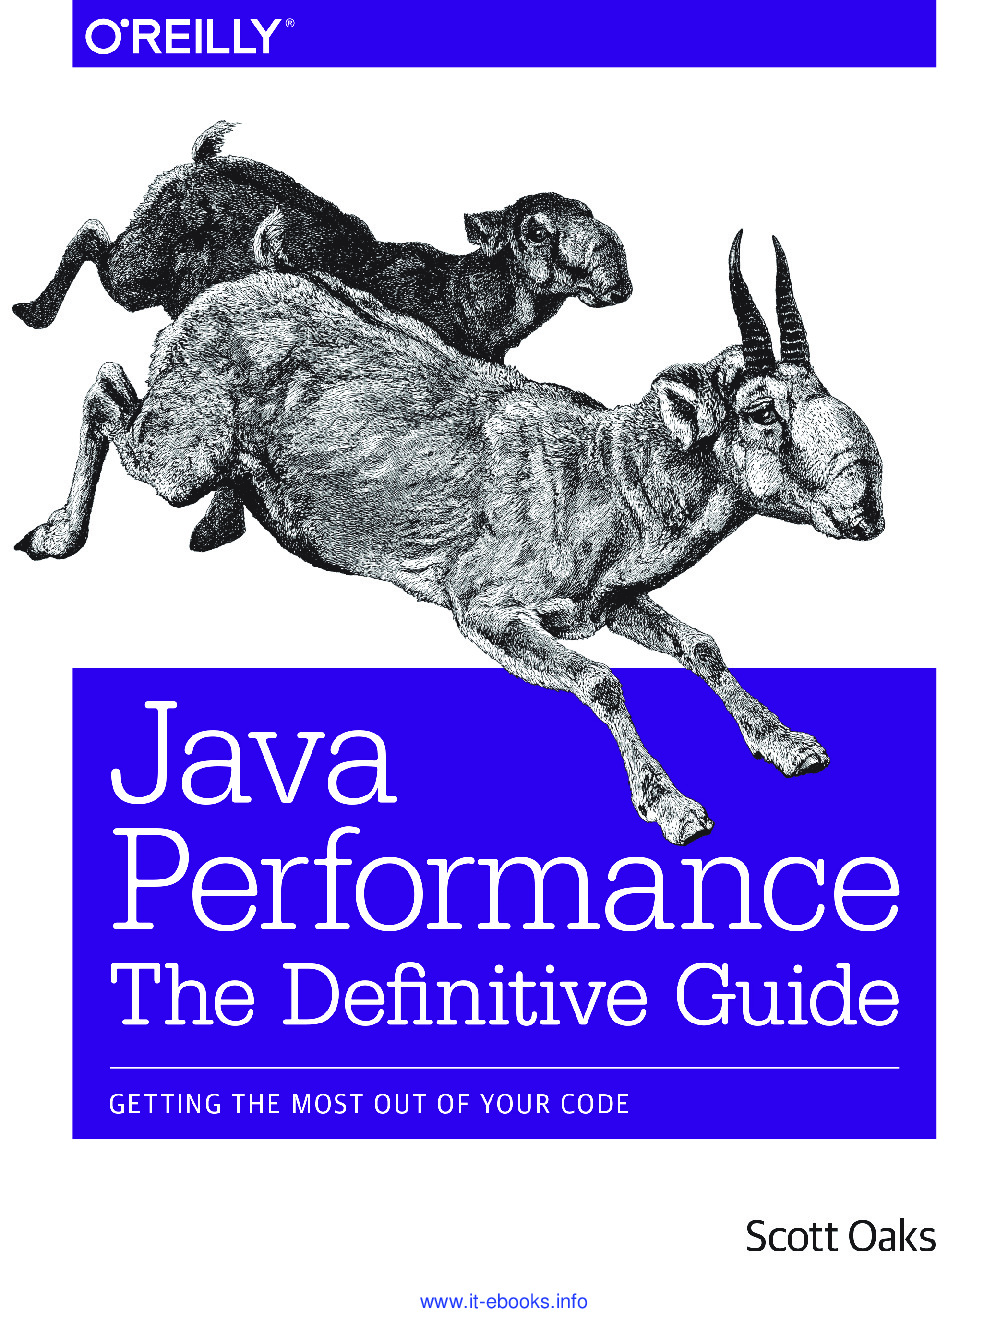 [JAVA][Java Performance – The Definitive Guide]